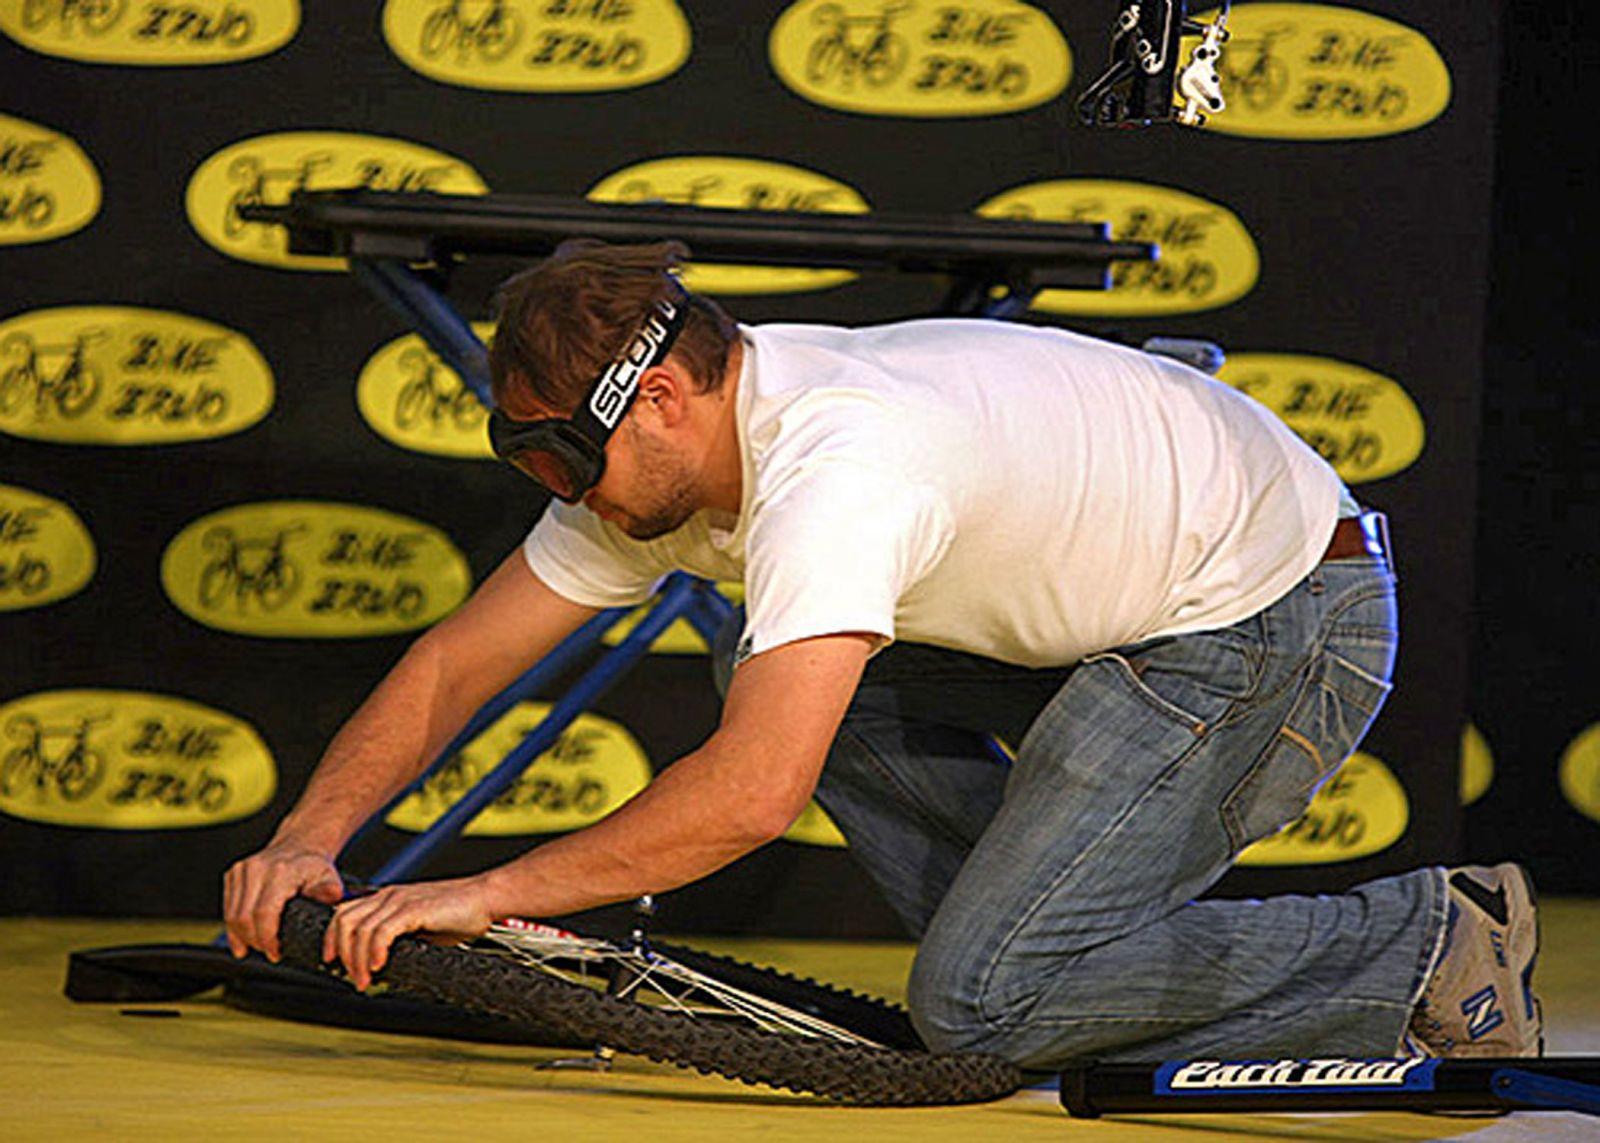 Man in white shirt and blackened ski goggled fixing a bicycle on the ground